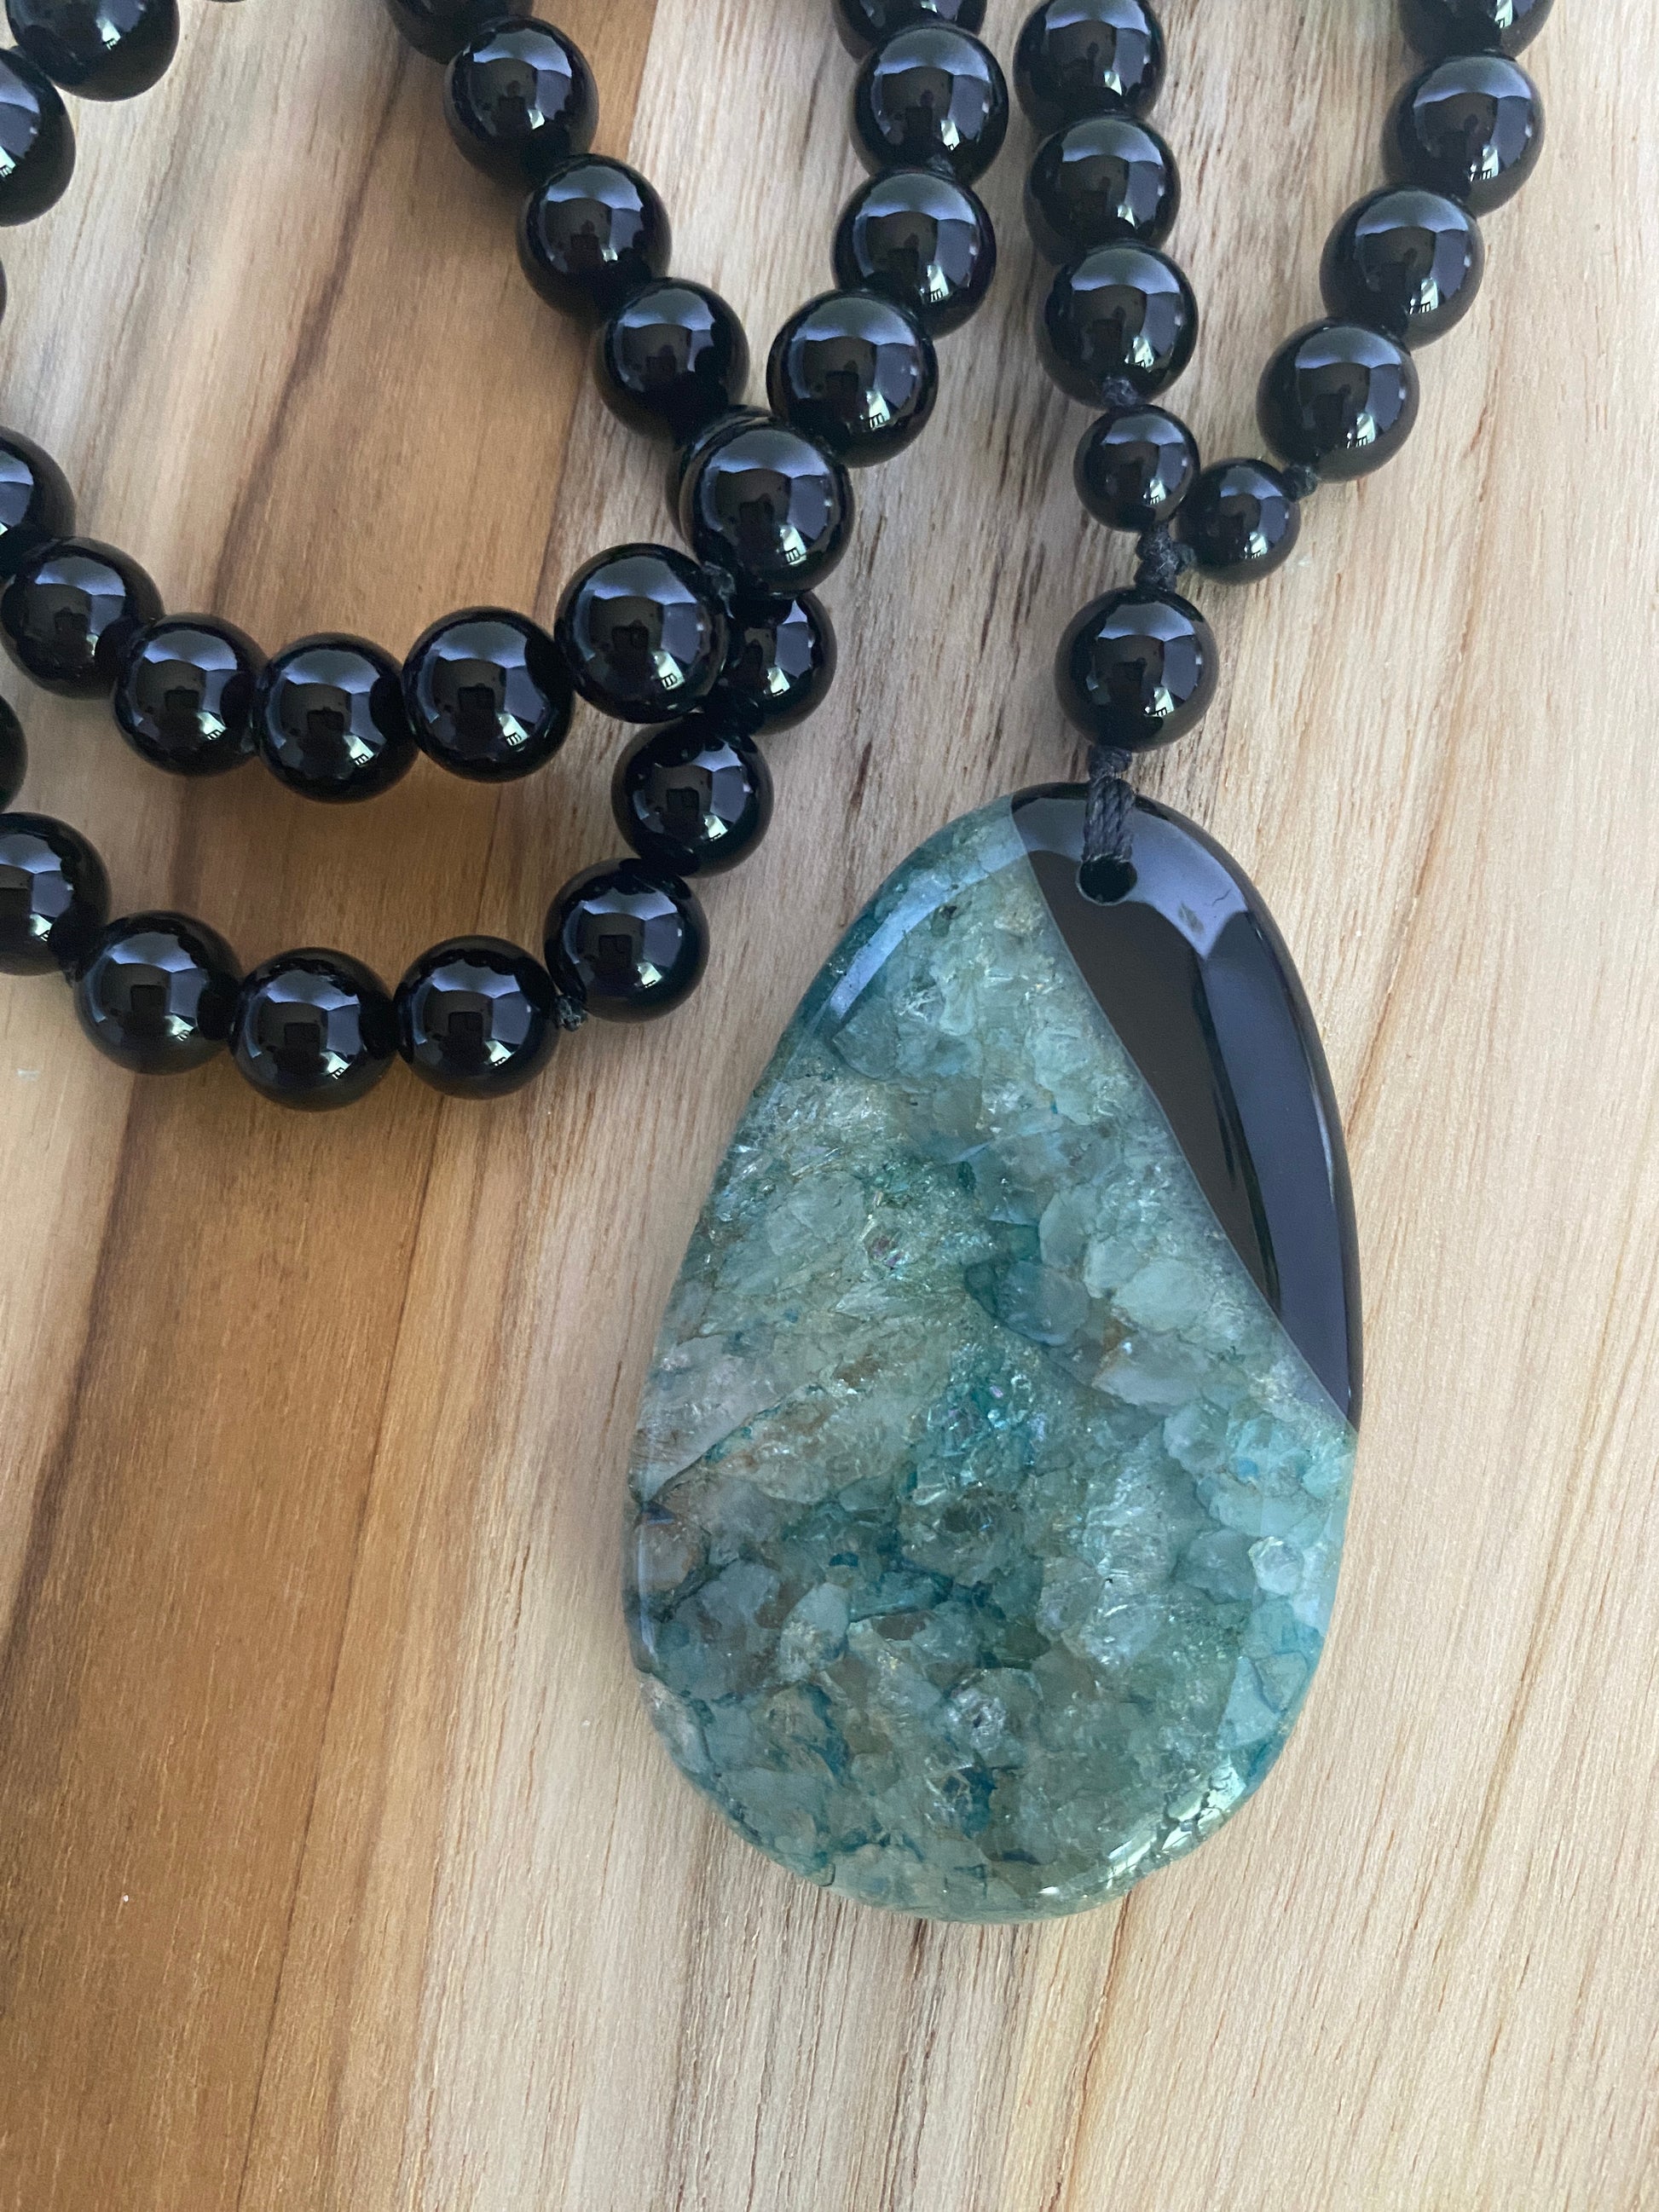 29" Long Black/Teal Druzy Geode Pendant Necklace with Black Onyx & Crystal Beads - My Urban Gems